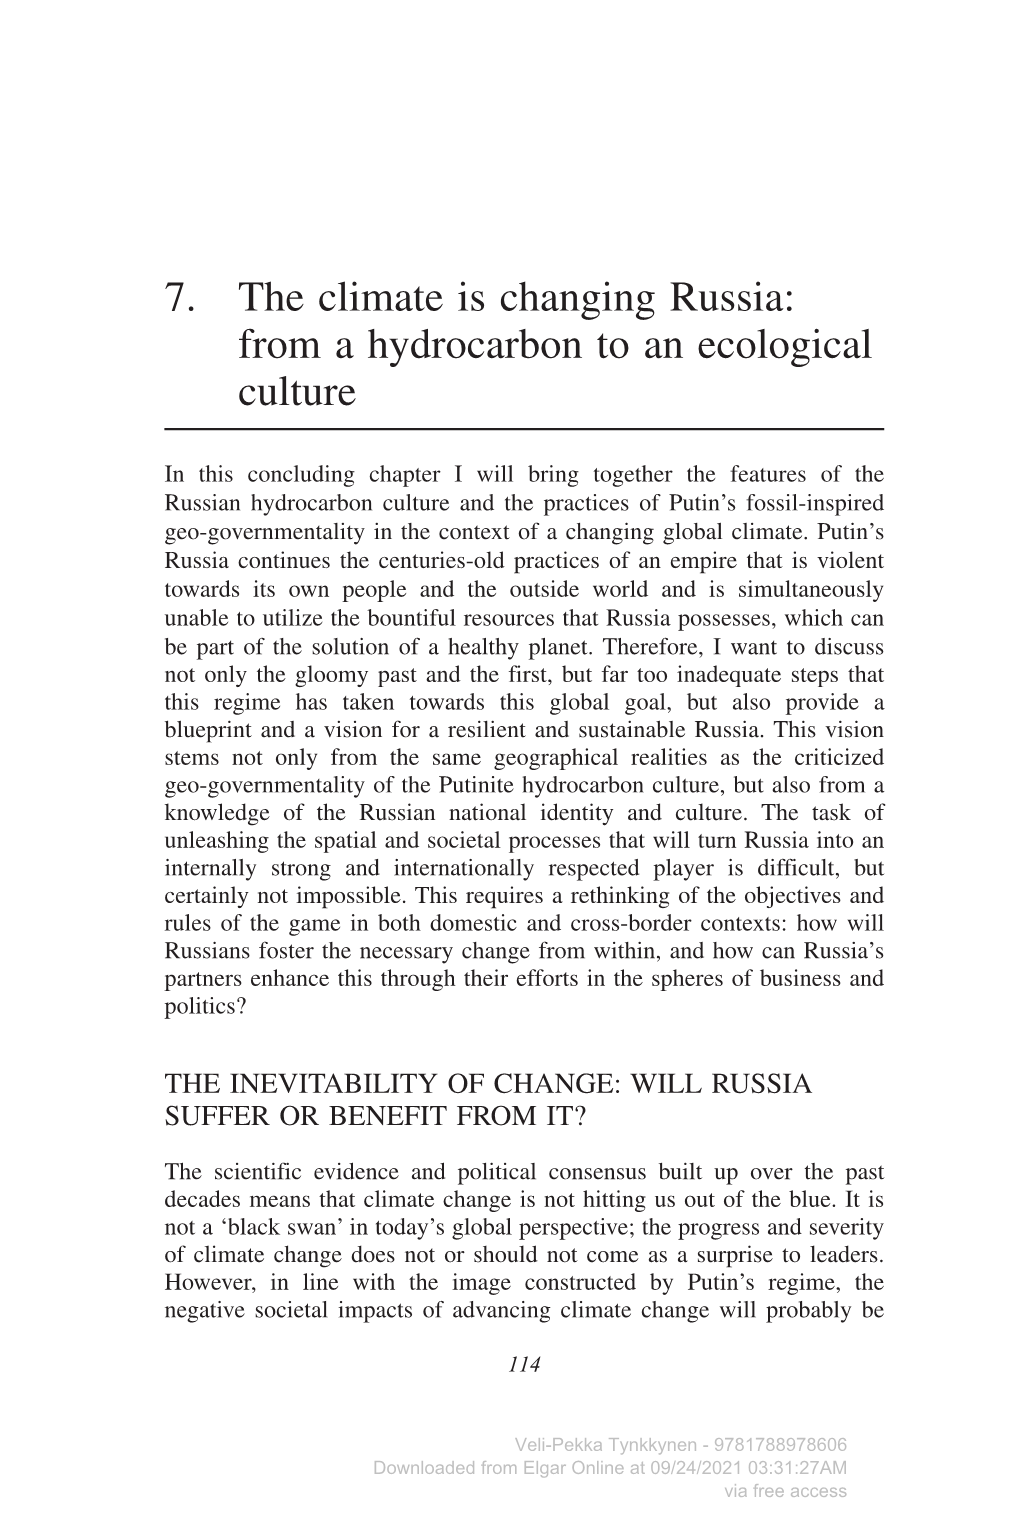 7. the Climate Is Changing Russia: from a Hydrocarbon to an Ecological Culture